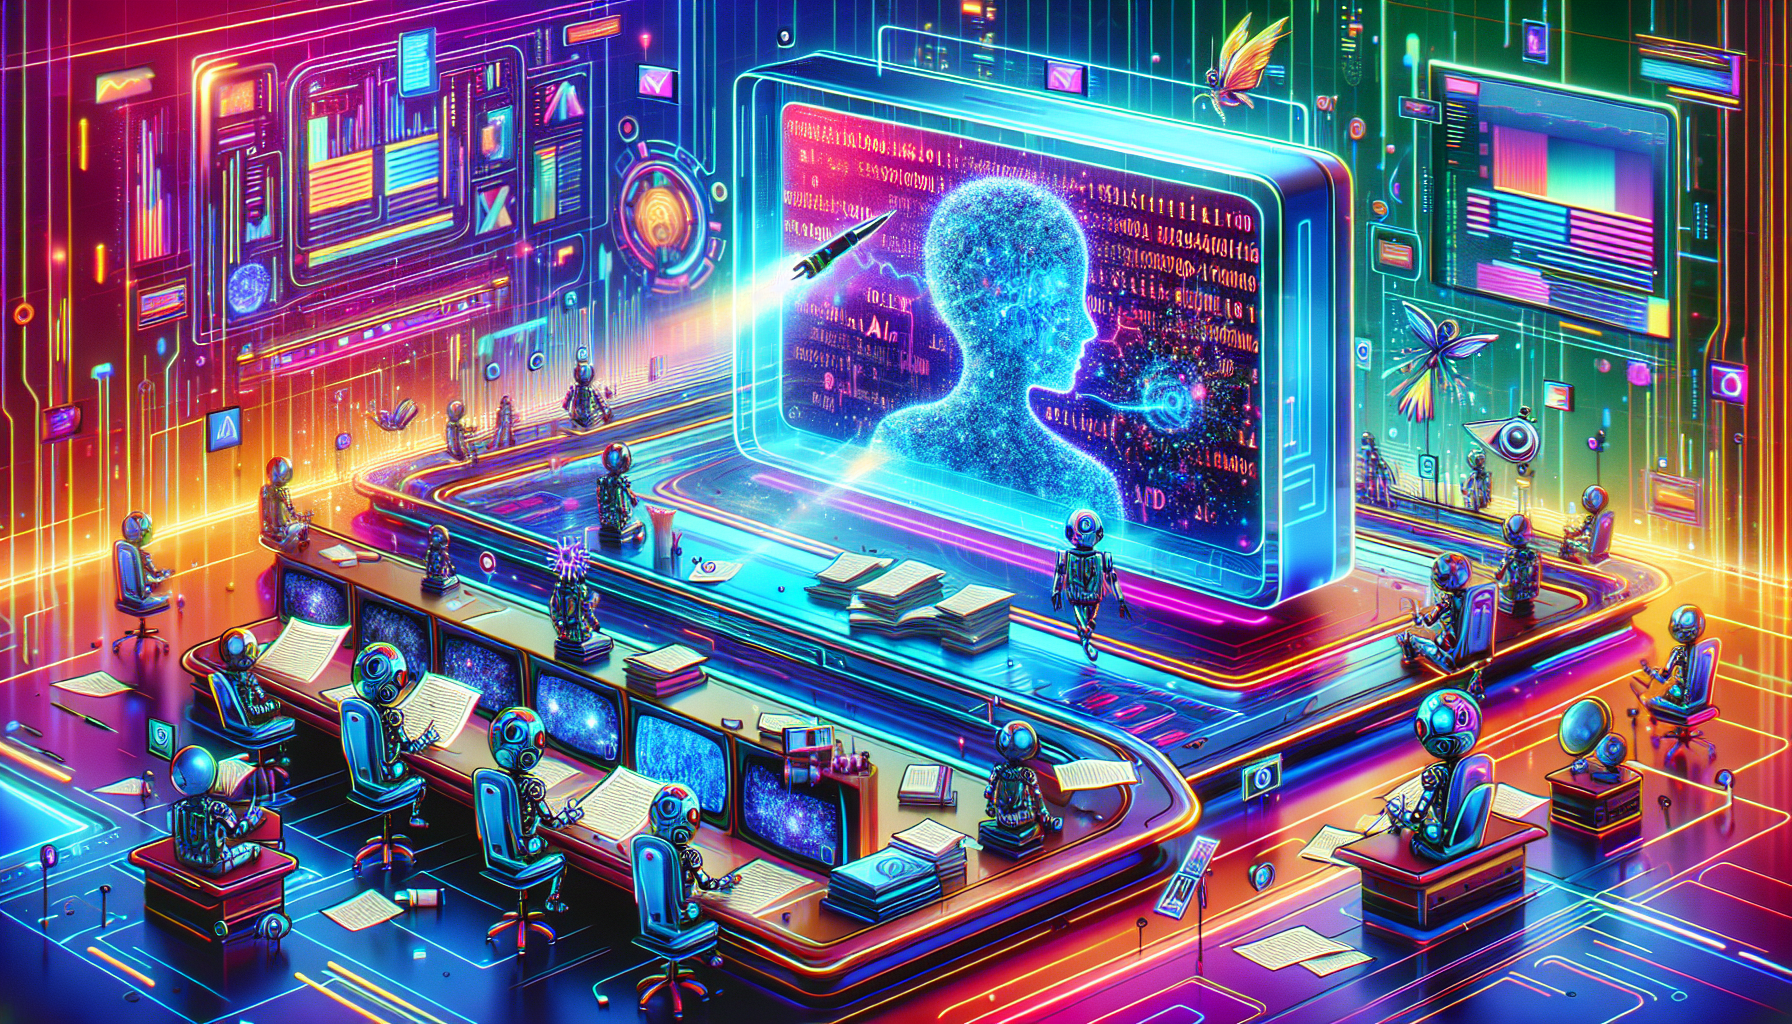 A vivid, color-saturated illustration portraying the future of television with the integration of artificial intelligence. Picture a visual scene that embodies a futuristic and high-tech control room. In the midst of the scene, there is a large, sleek, transparent screen displaying a continuous stream of codes and algorithms symbolizing AI. Scattered around are small robots, writing stories on paper, signifying the rise of AI in screenwriting. The mood is vibrant and forward-thinking, infused with hues of neon and metallic colors, depicting the modern feel.